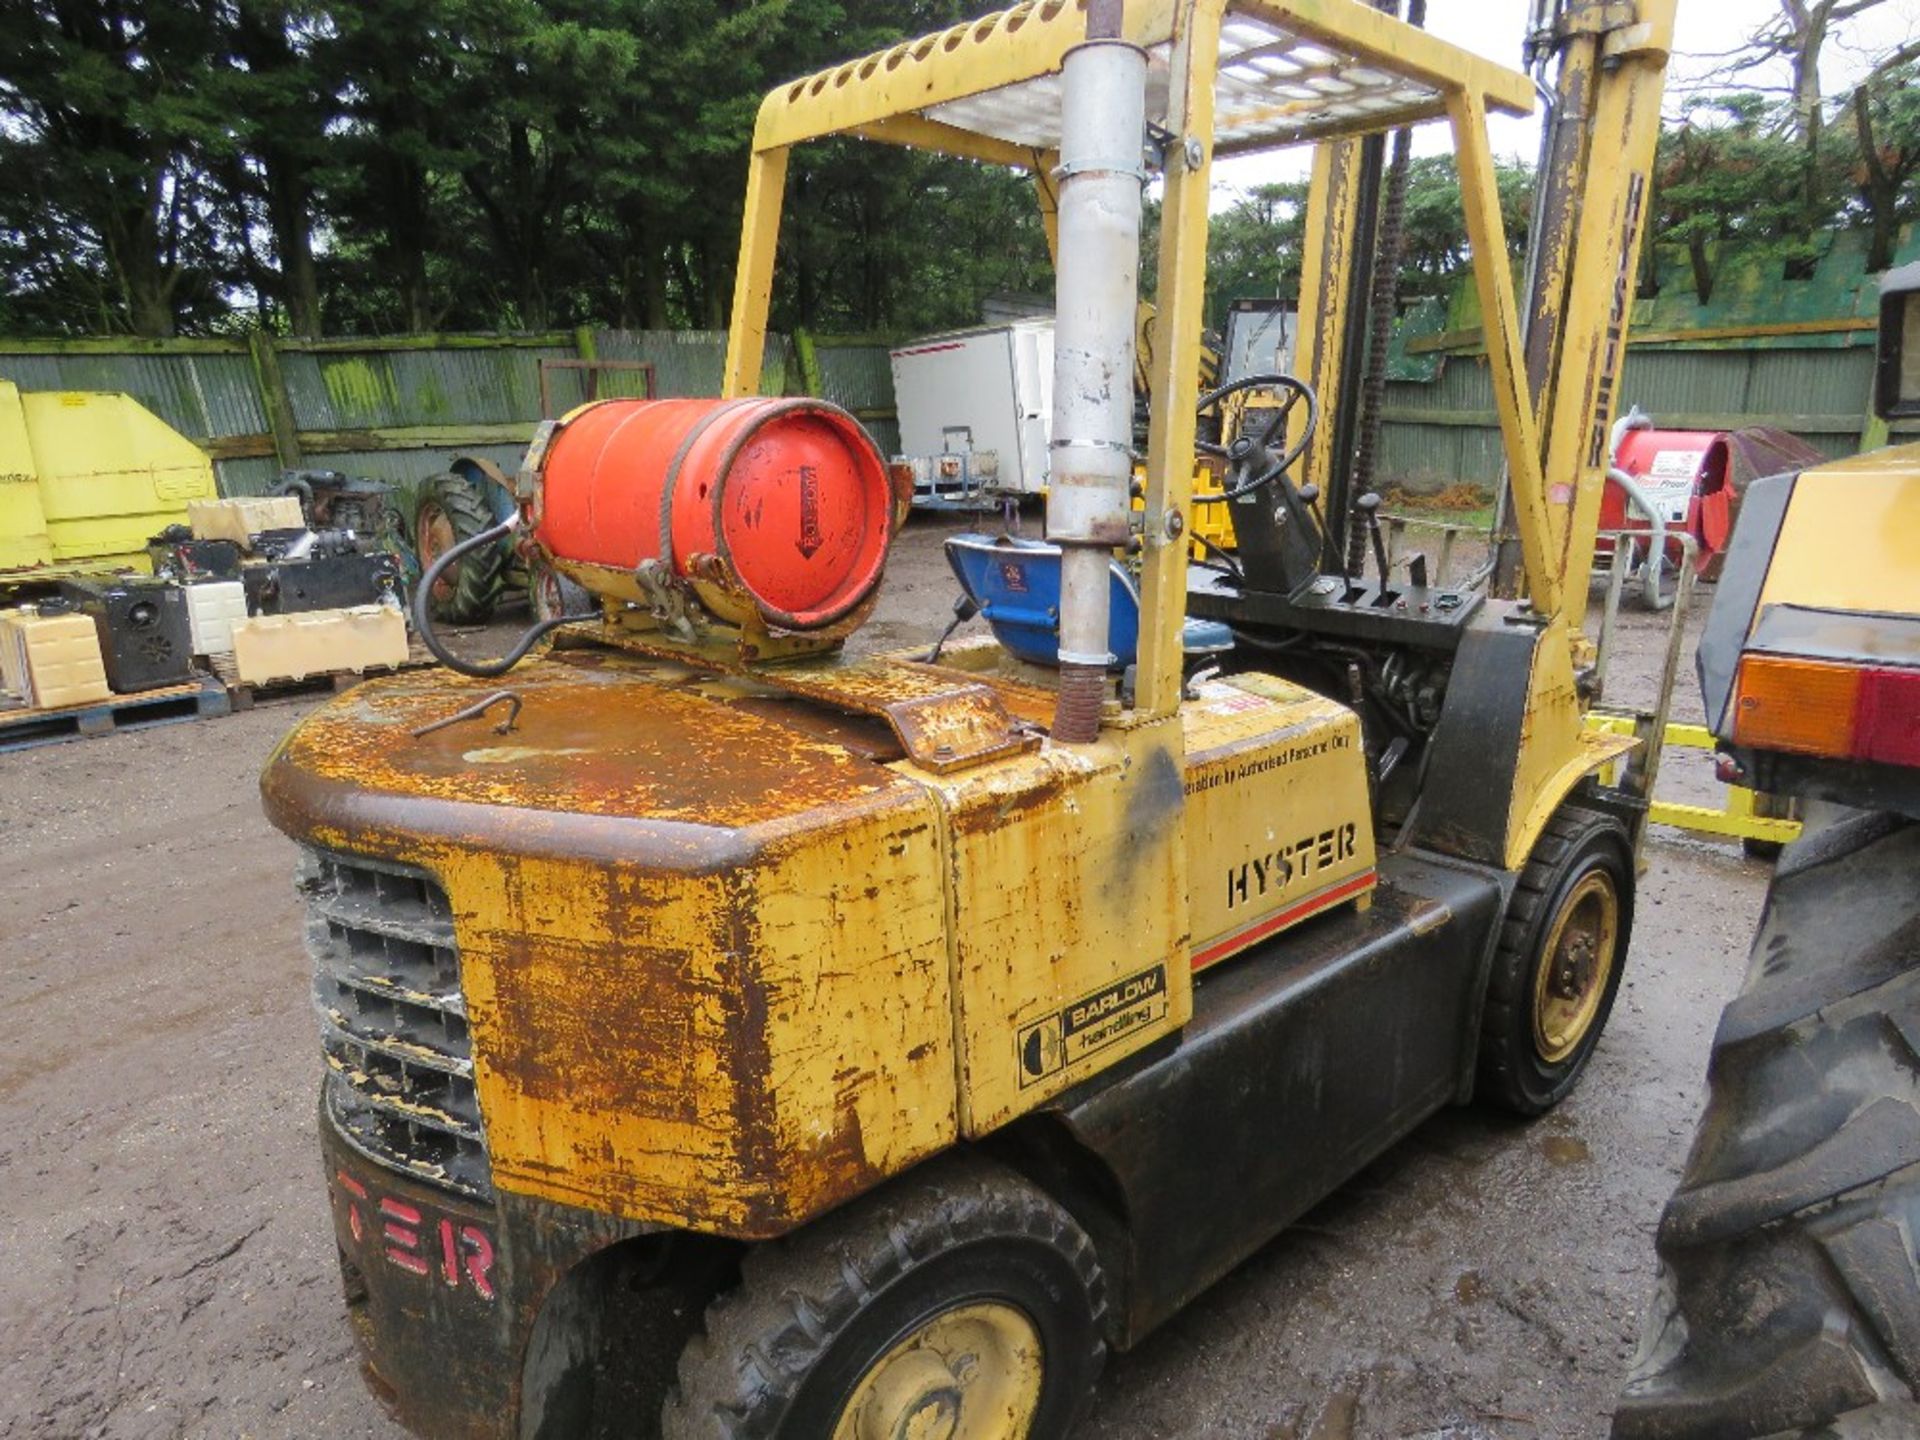 HYSTER GAS POWERED FORKLIFT TRUCK WITH SIDE SHIFT, 3.5 TONNE RATED LIFT CAPACITY. WHEN TESTED WAS SE - Image 6 of 11